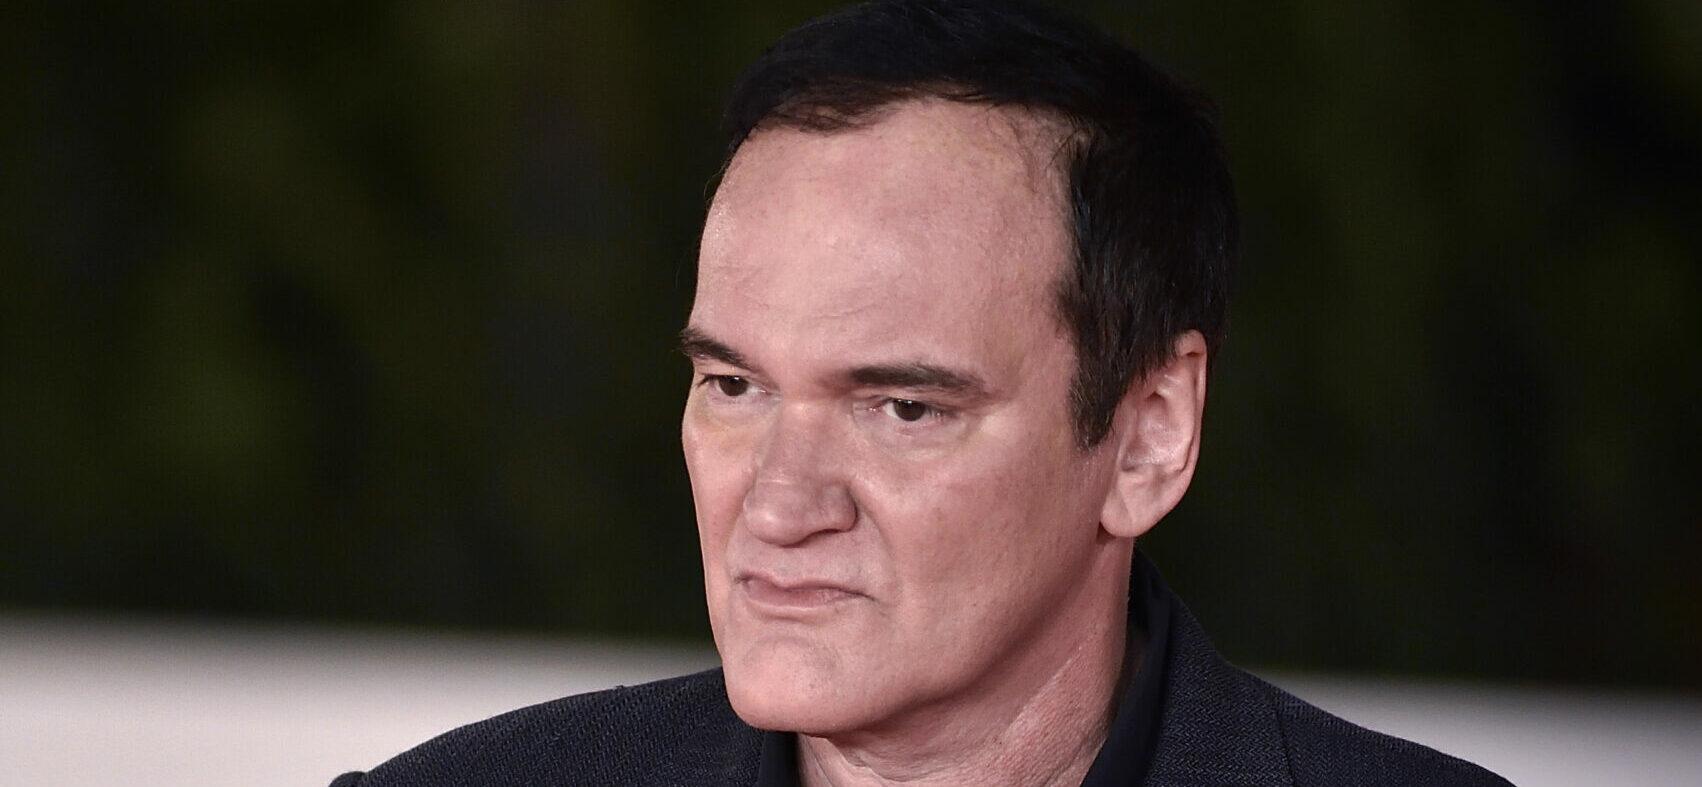 Quentin Tarantino Slams Current Era Of Movies As ‘Worst In Hollywood History’